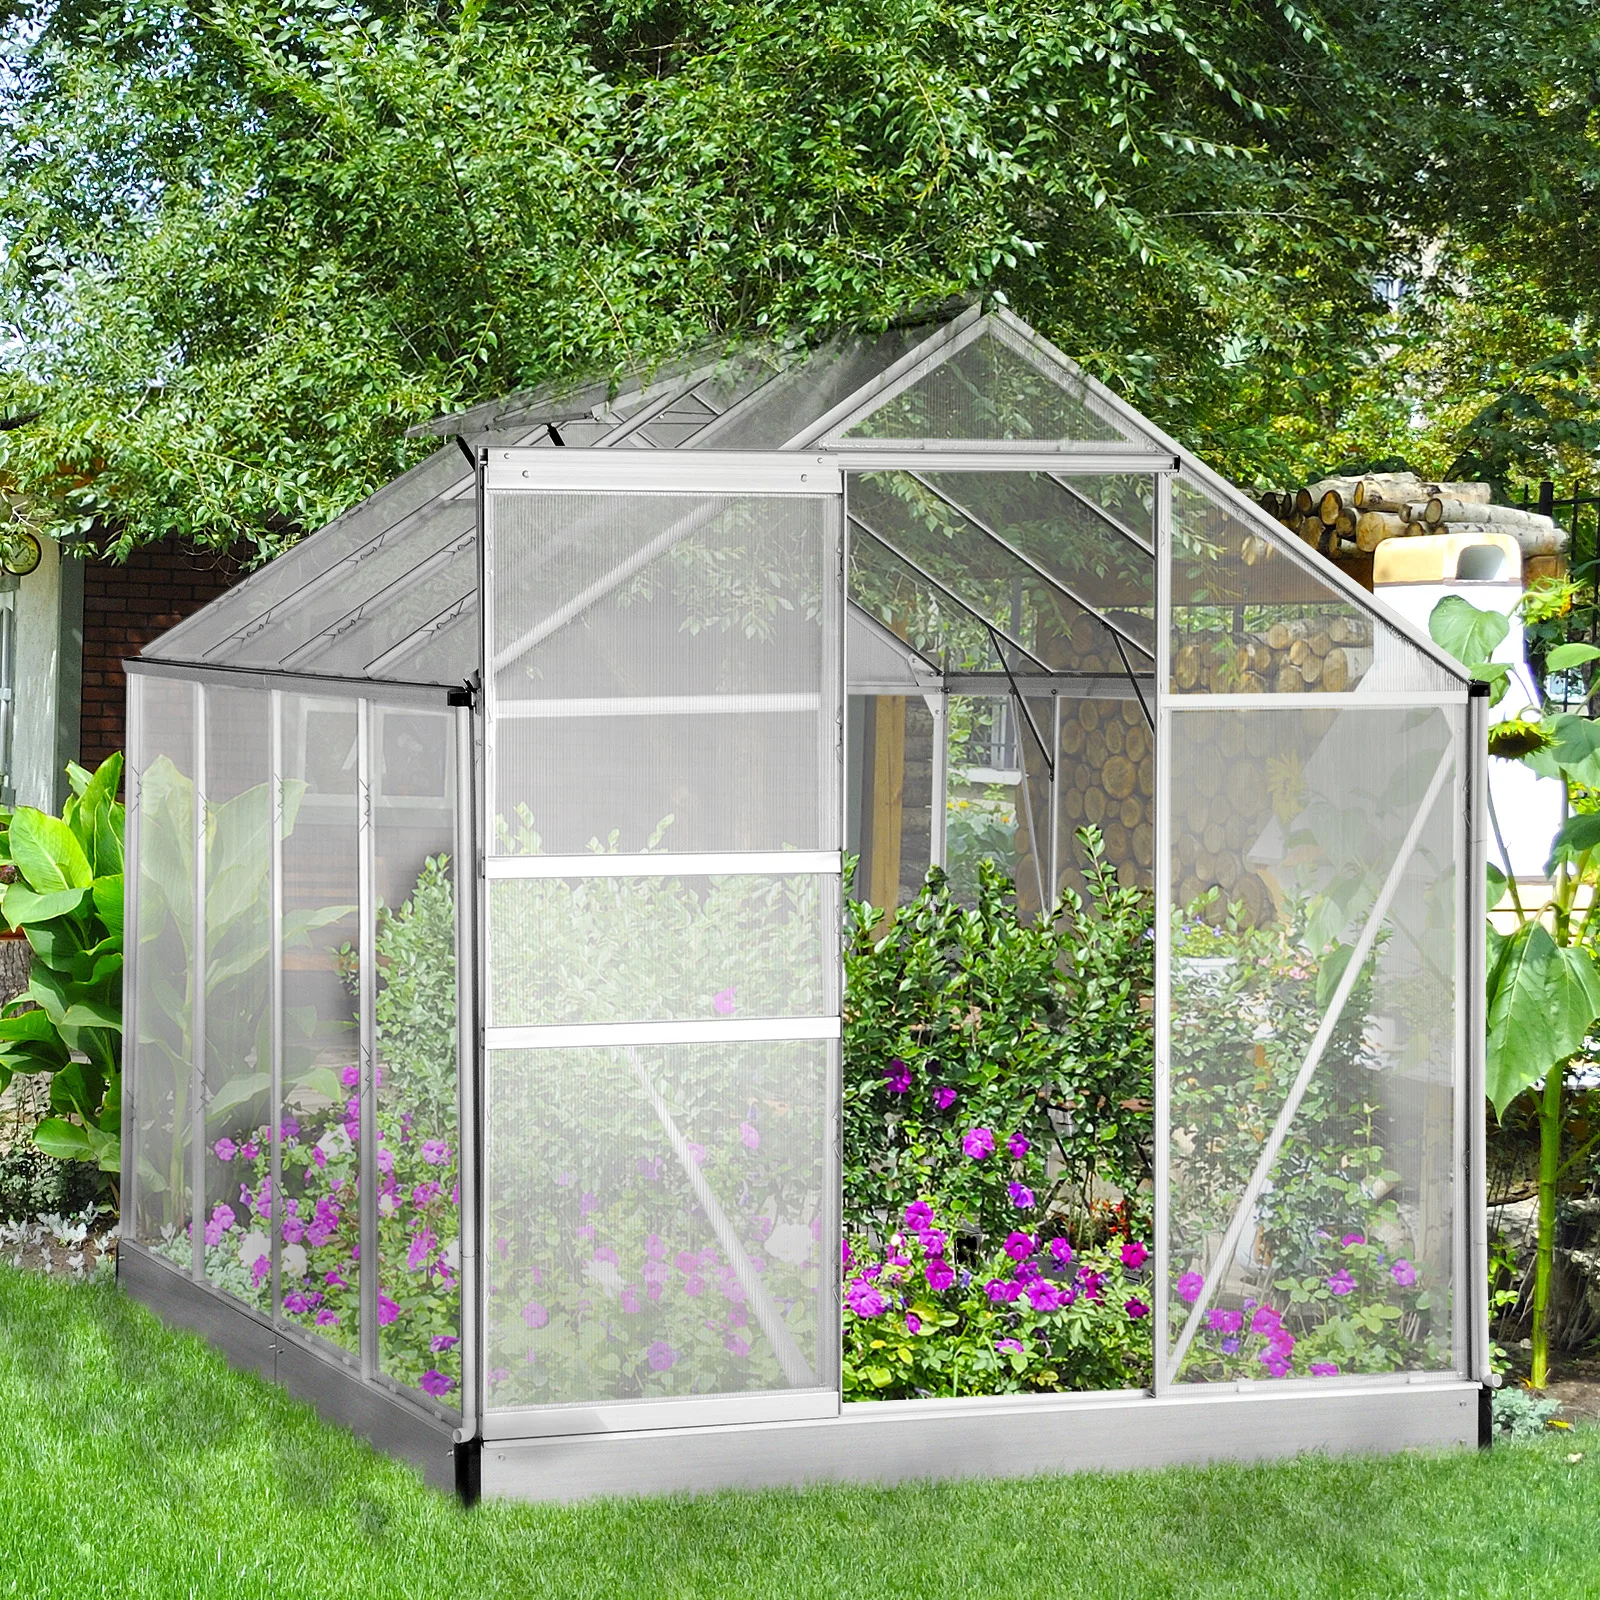 

Sunmthink Polycarbonate Walk-in Garden Greenhouse with Adjustable Roof Vent and Rain Gutter for Plants, 6 x 8 FT